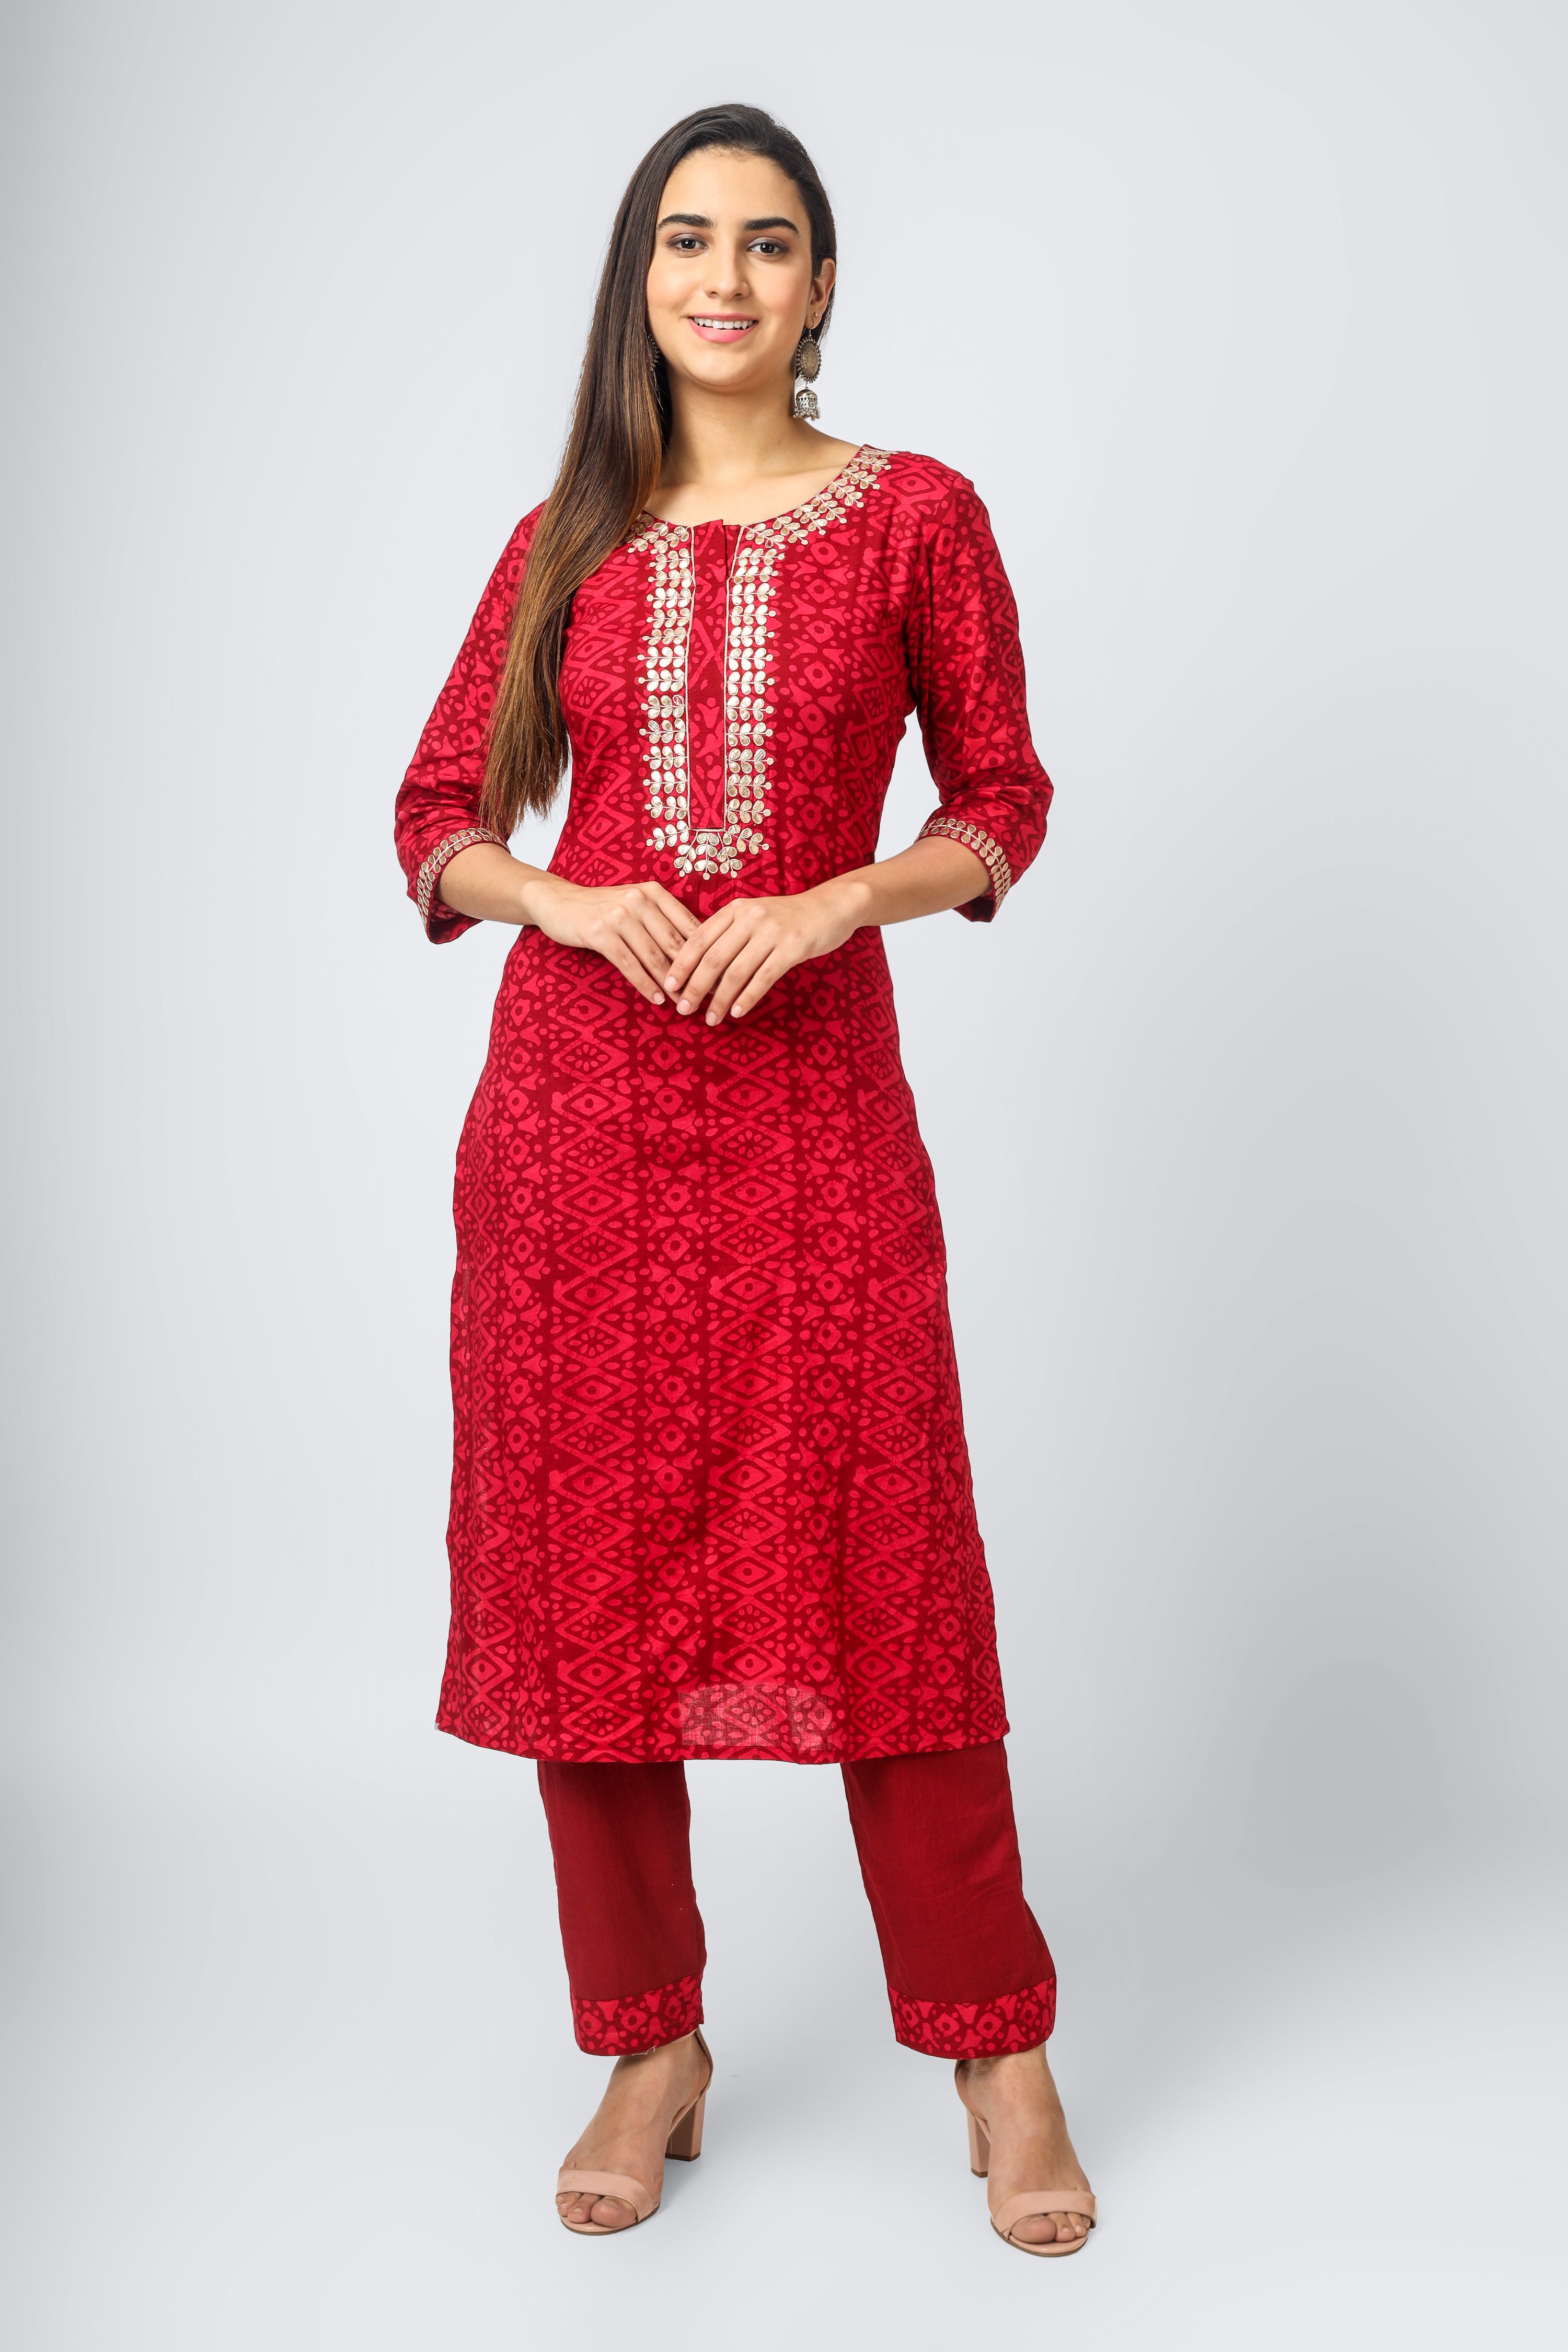 Short Sleeve Kurta With Pants for Women, Red Chikan Embroidery Kurti and  White Trouser Pant for Ladies, Lucknowi Chikan Work Salwar Kameez - Etsy